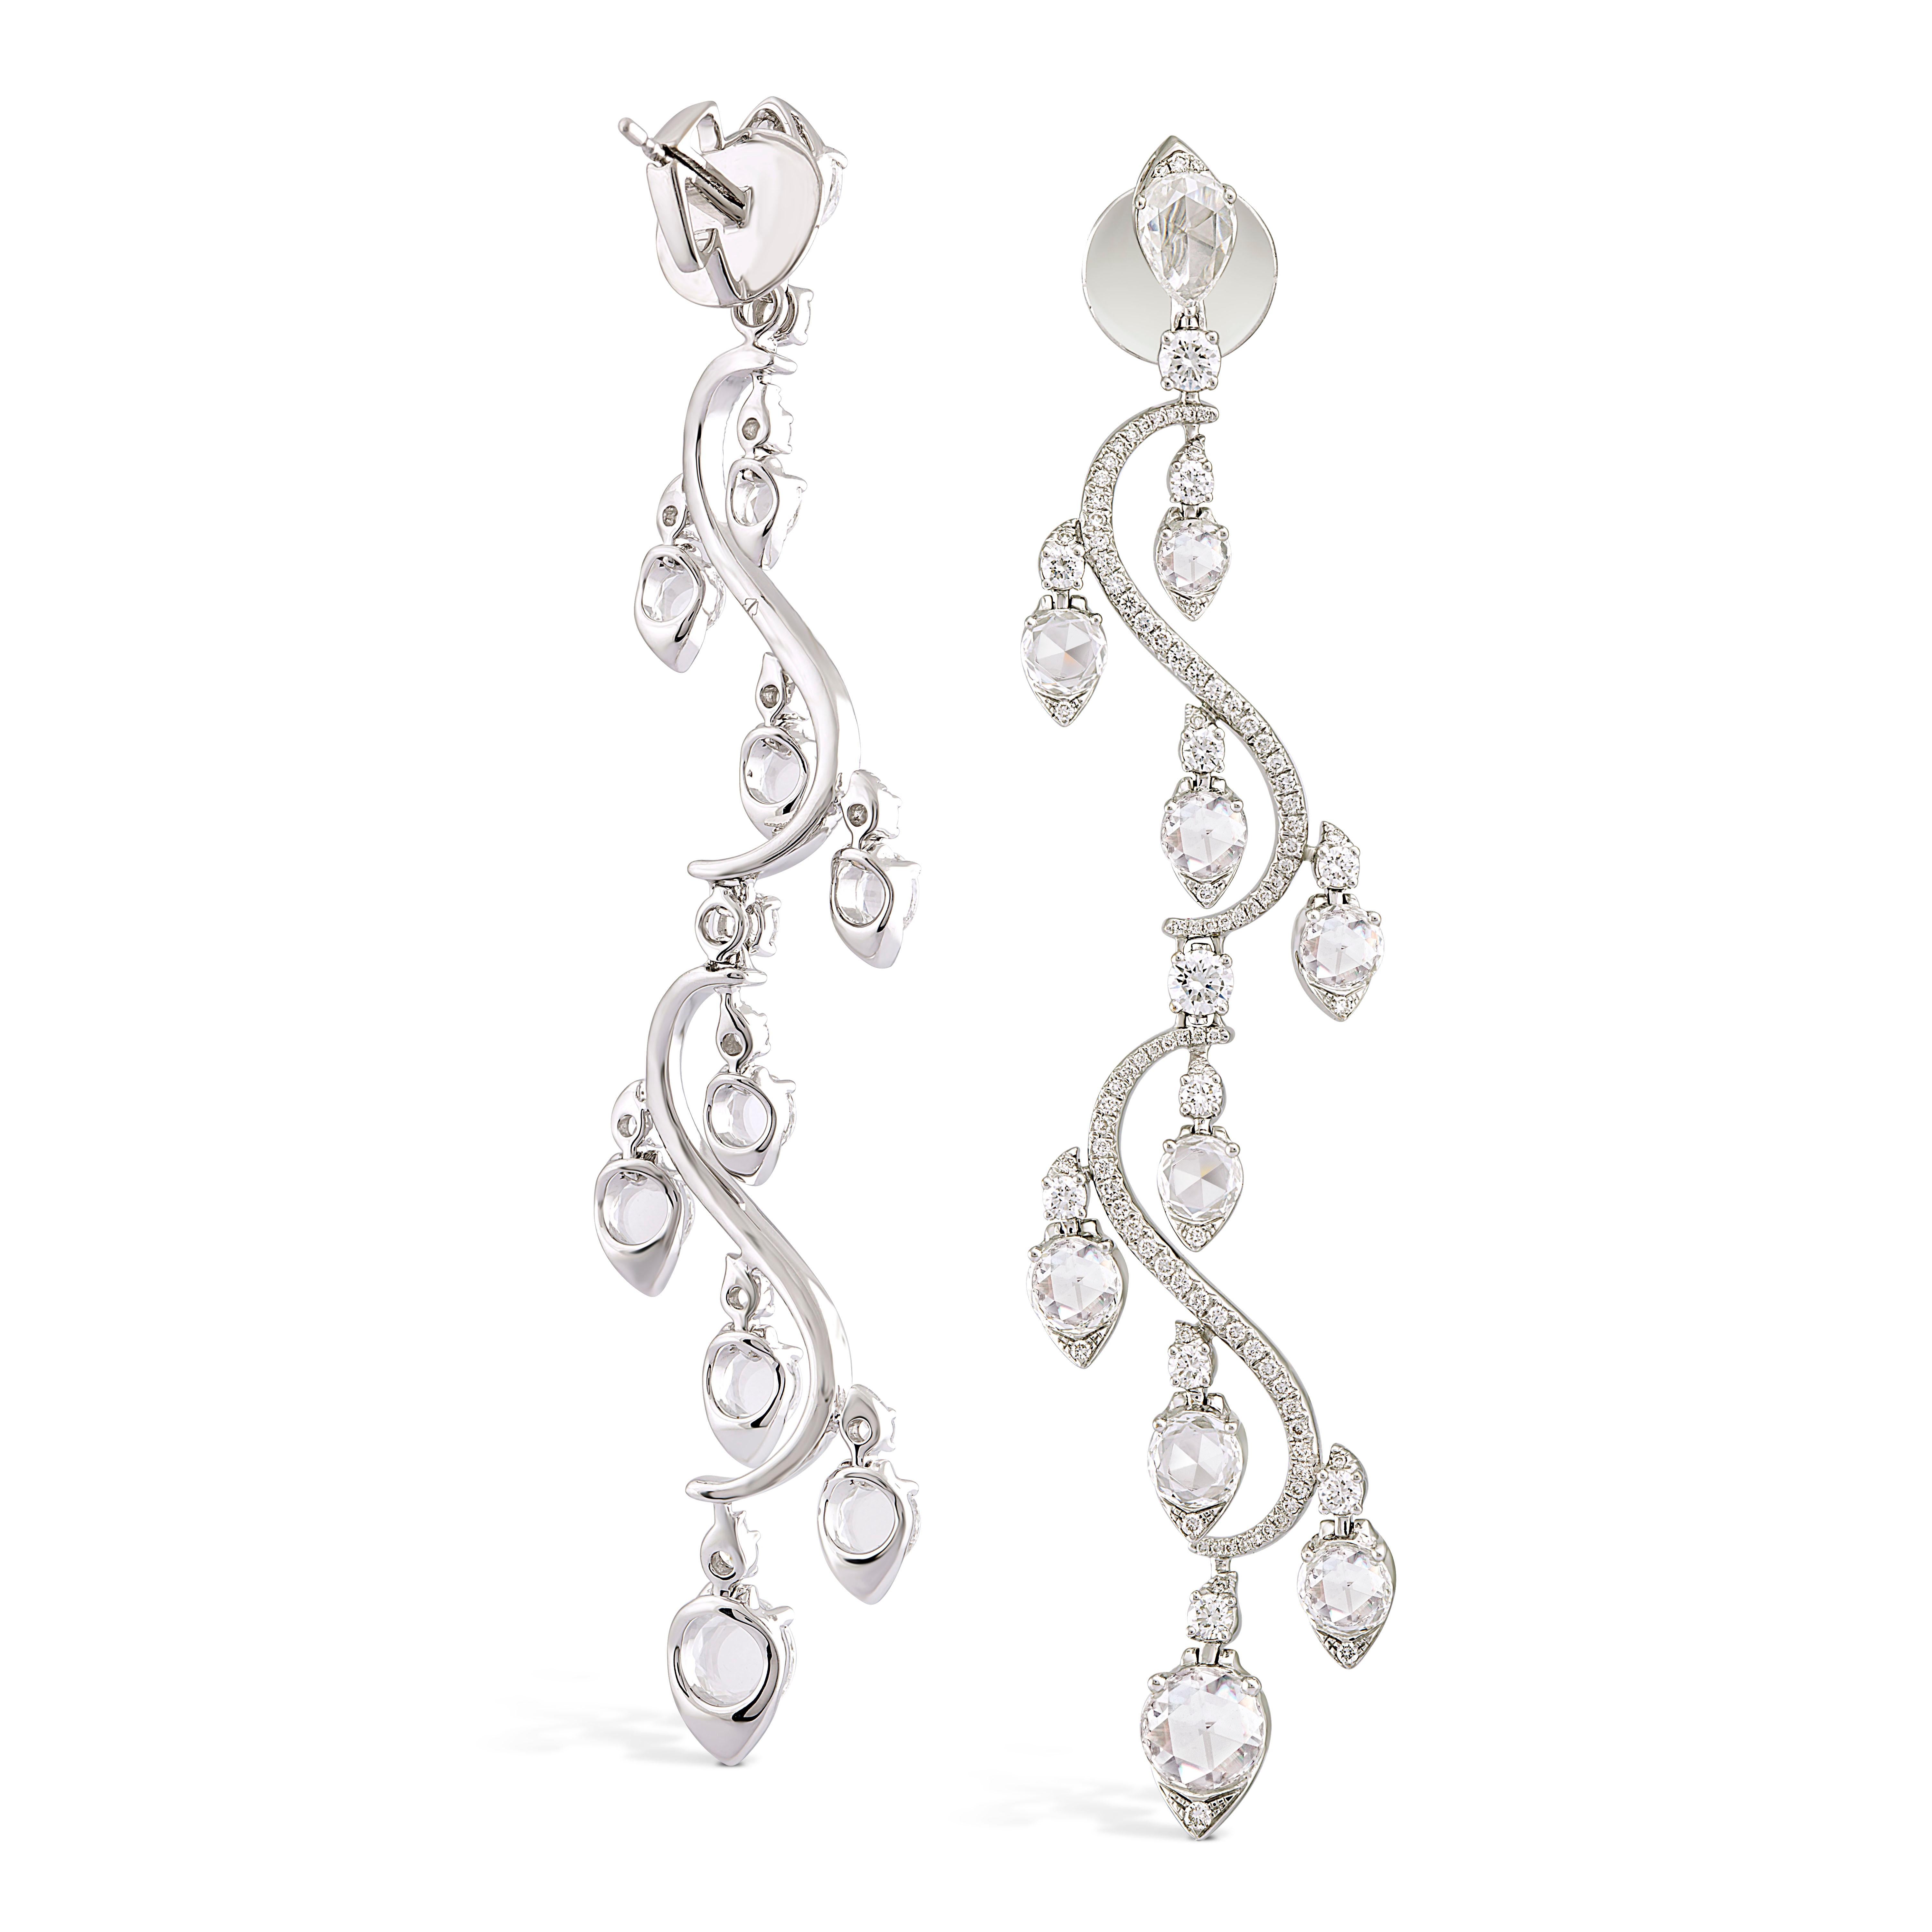 With their fluid form, these timeless earrings drape sensuously from the ear. Intricately crafted with 18 rondelles of graduating sizes and finished with 212 round brilliant cut diamonds, these earrings are reflective of Rarever's delicate touch and